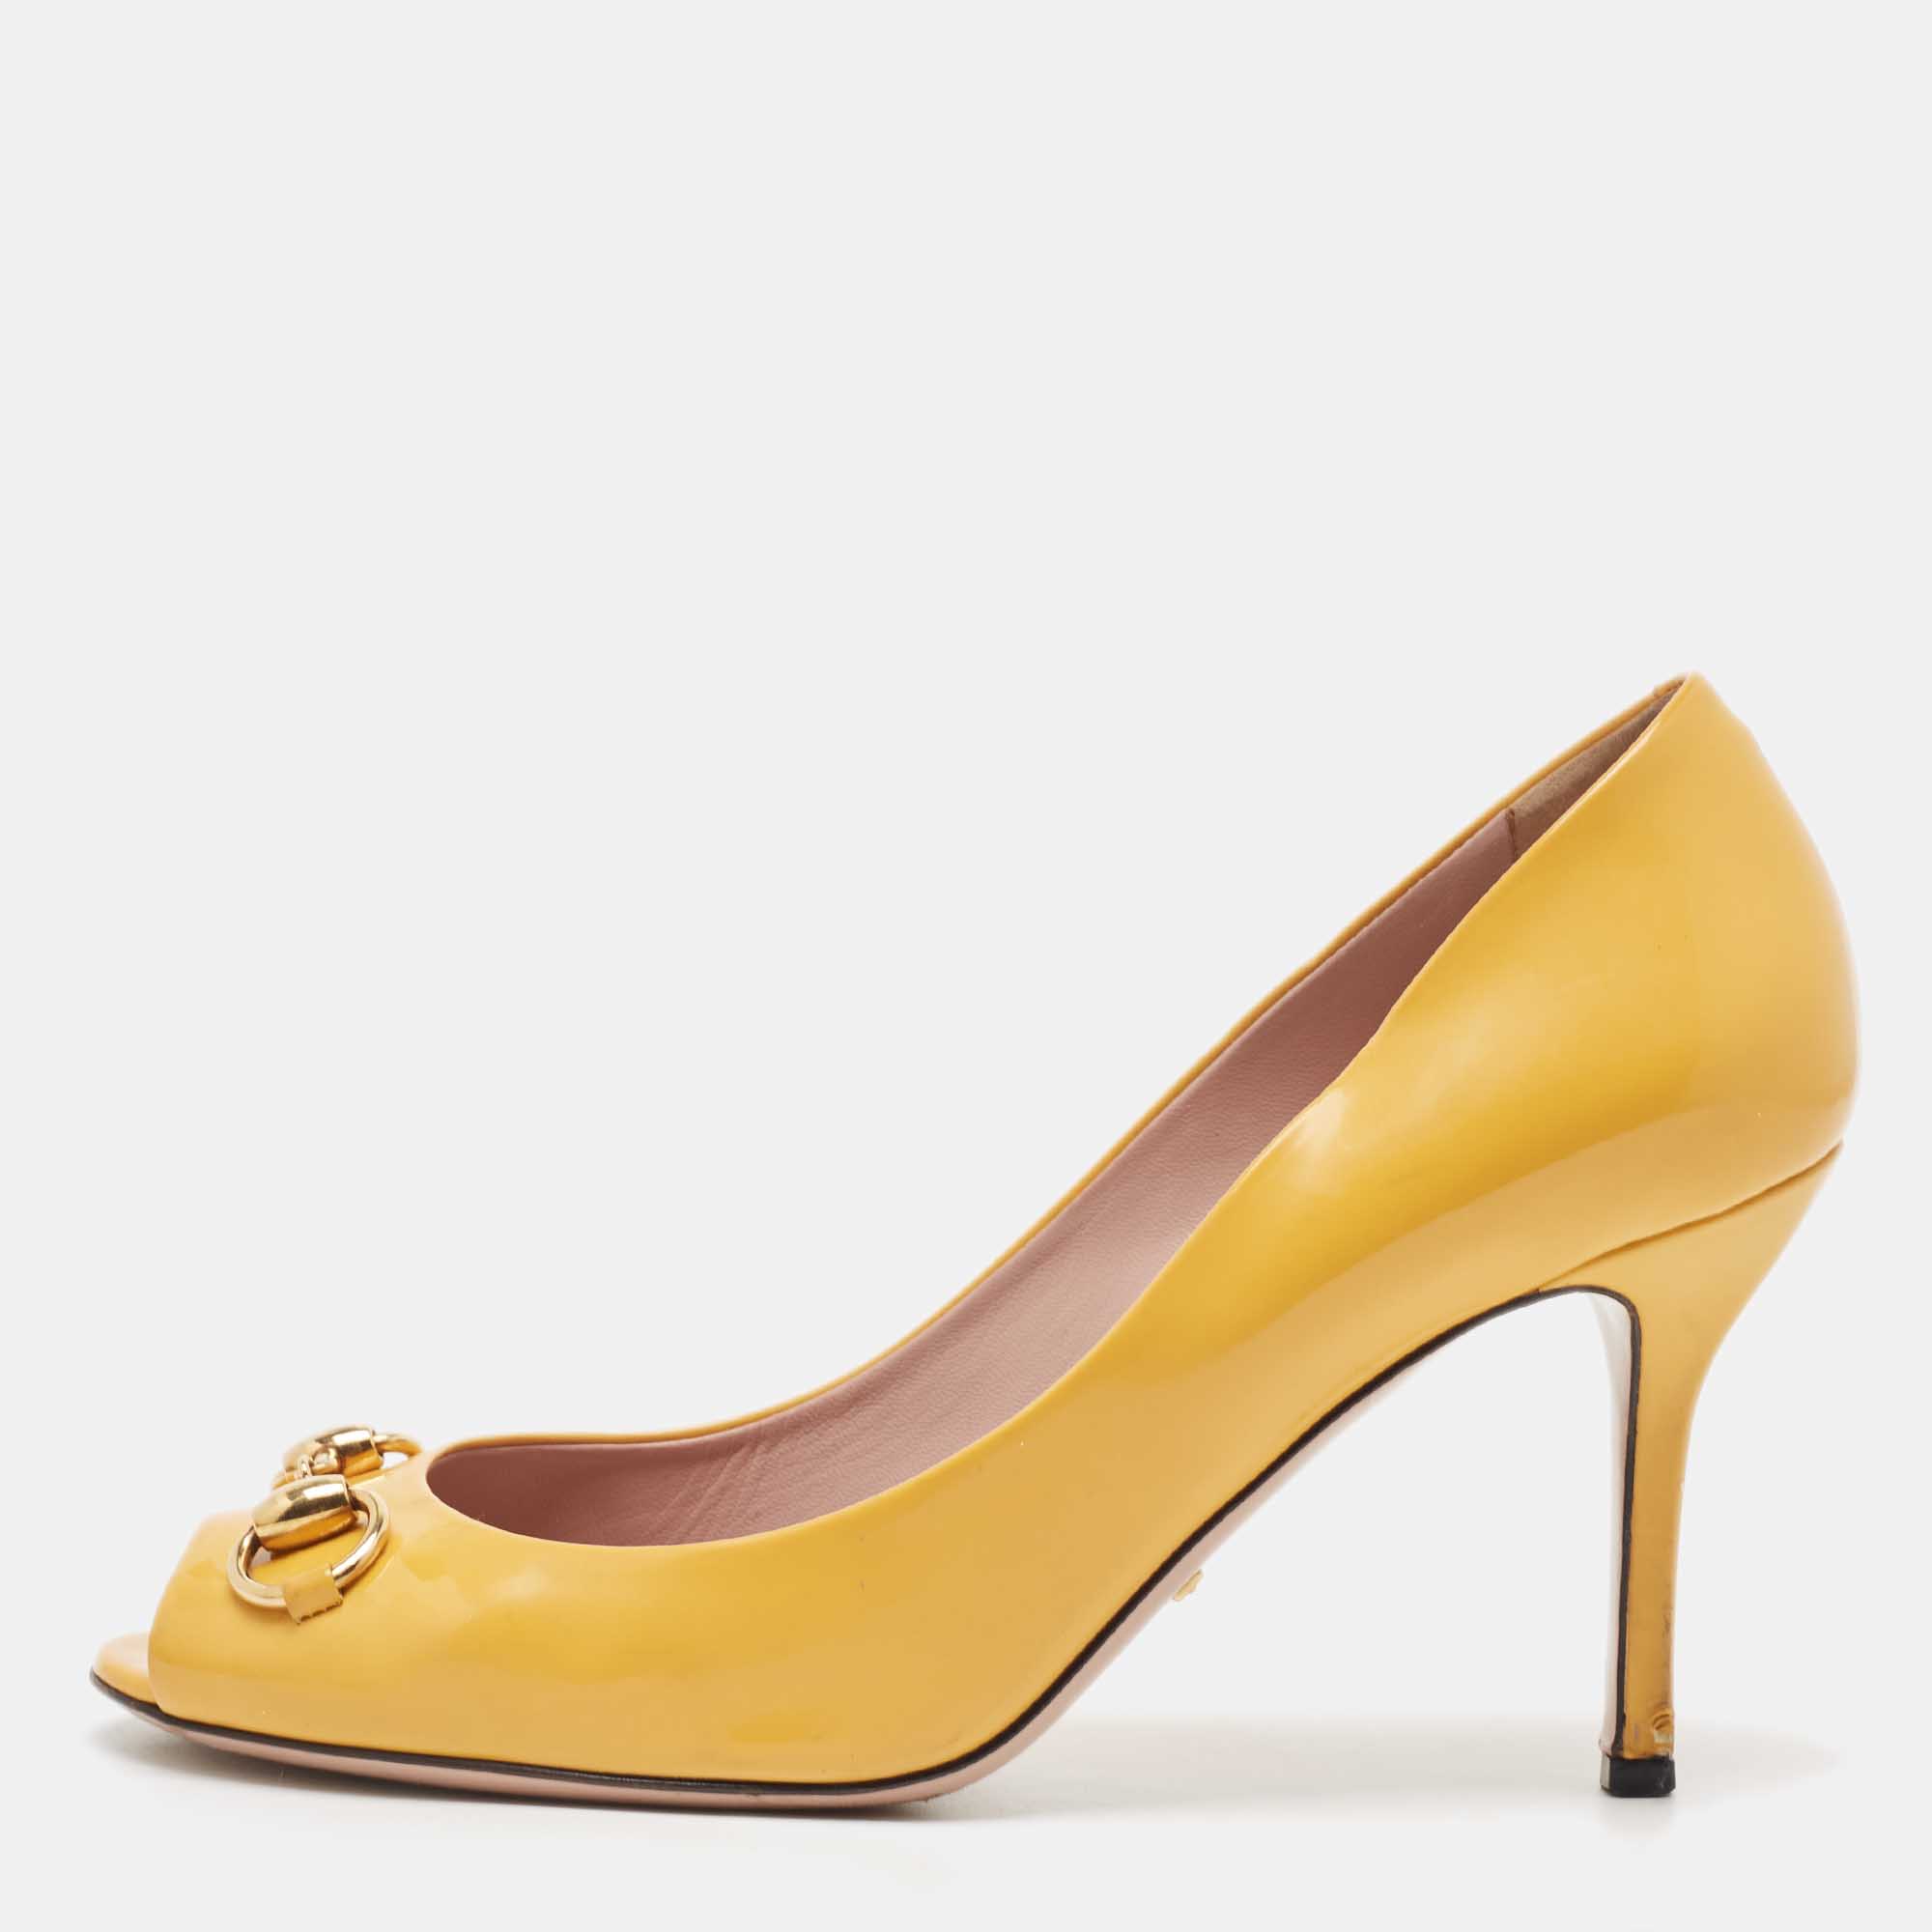 Pre-owned Gucci Yellow Patent Leather Horsebit Peep Toe Pumps Size 39